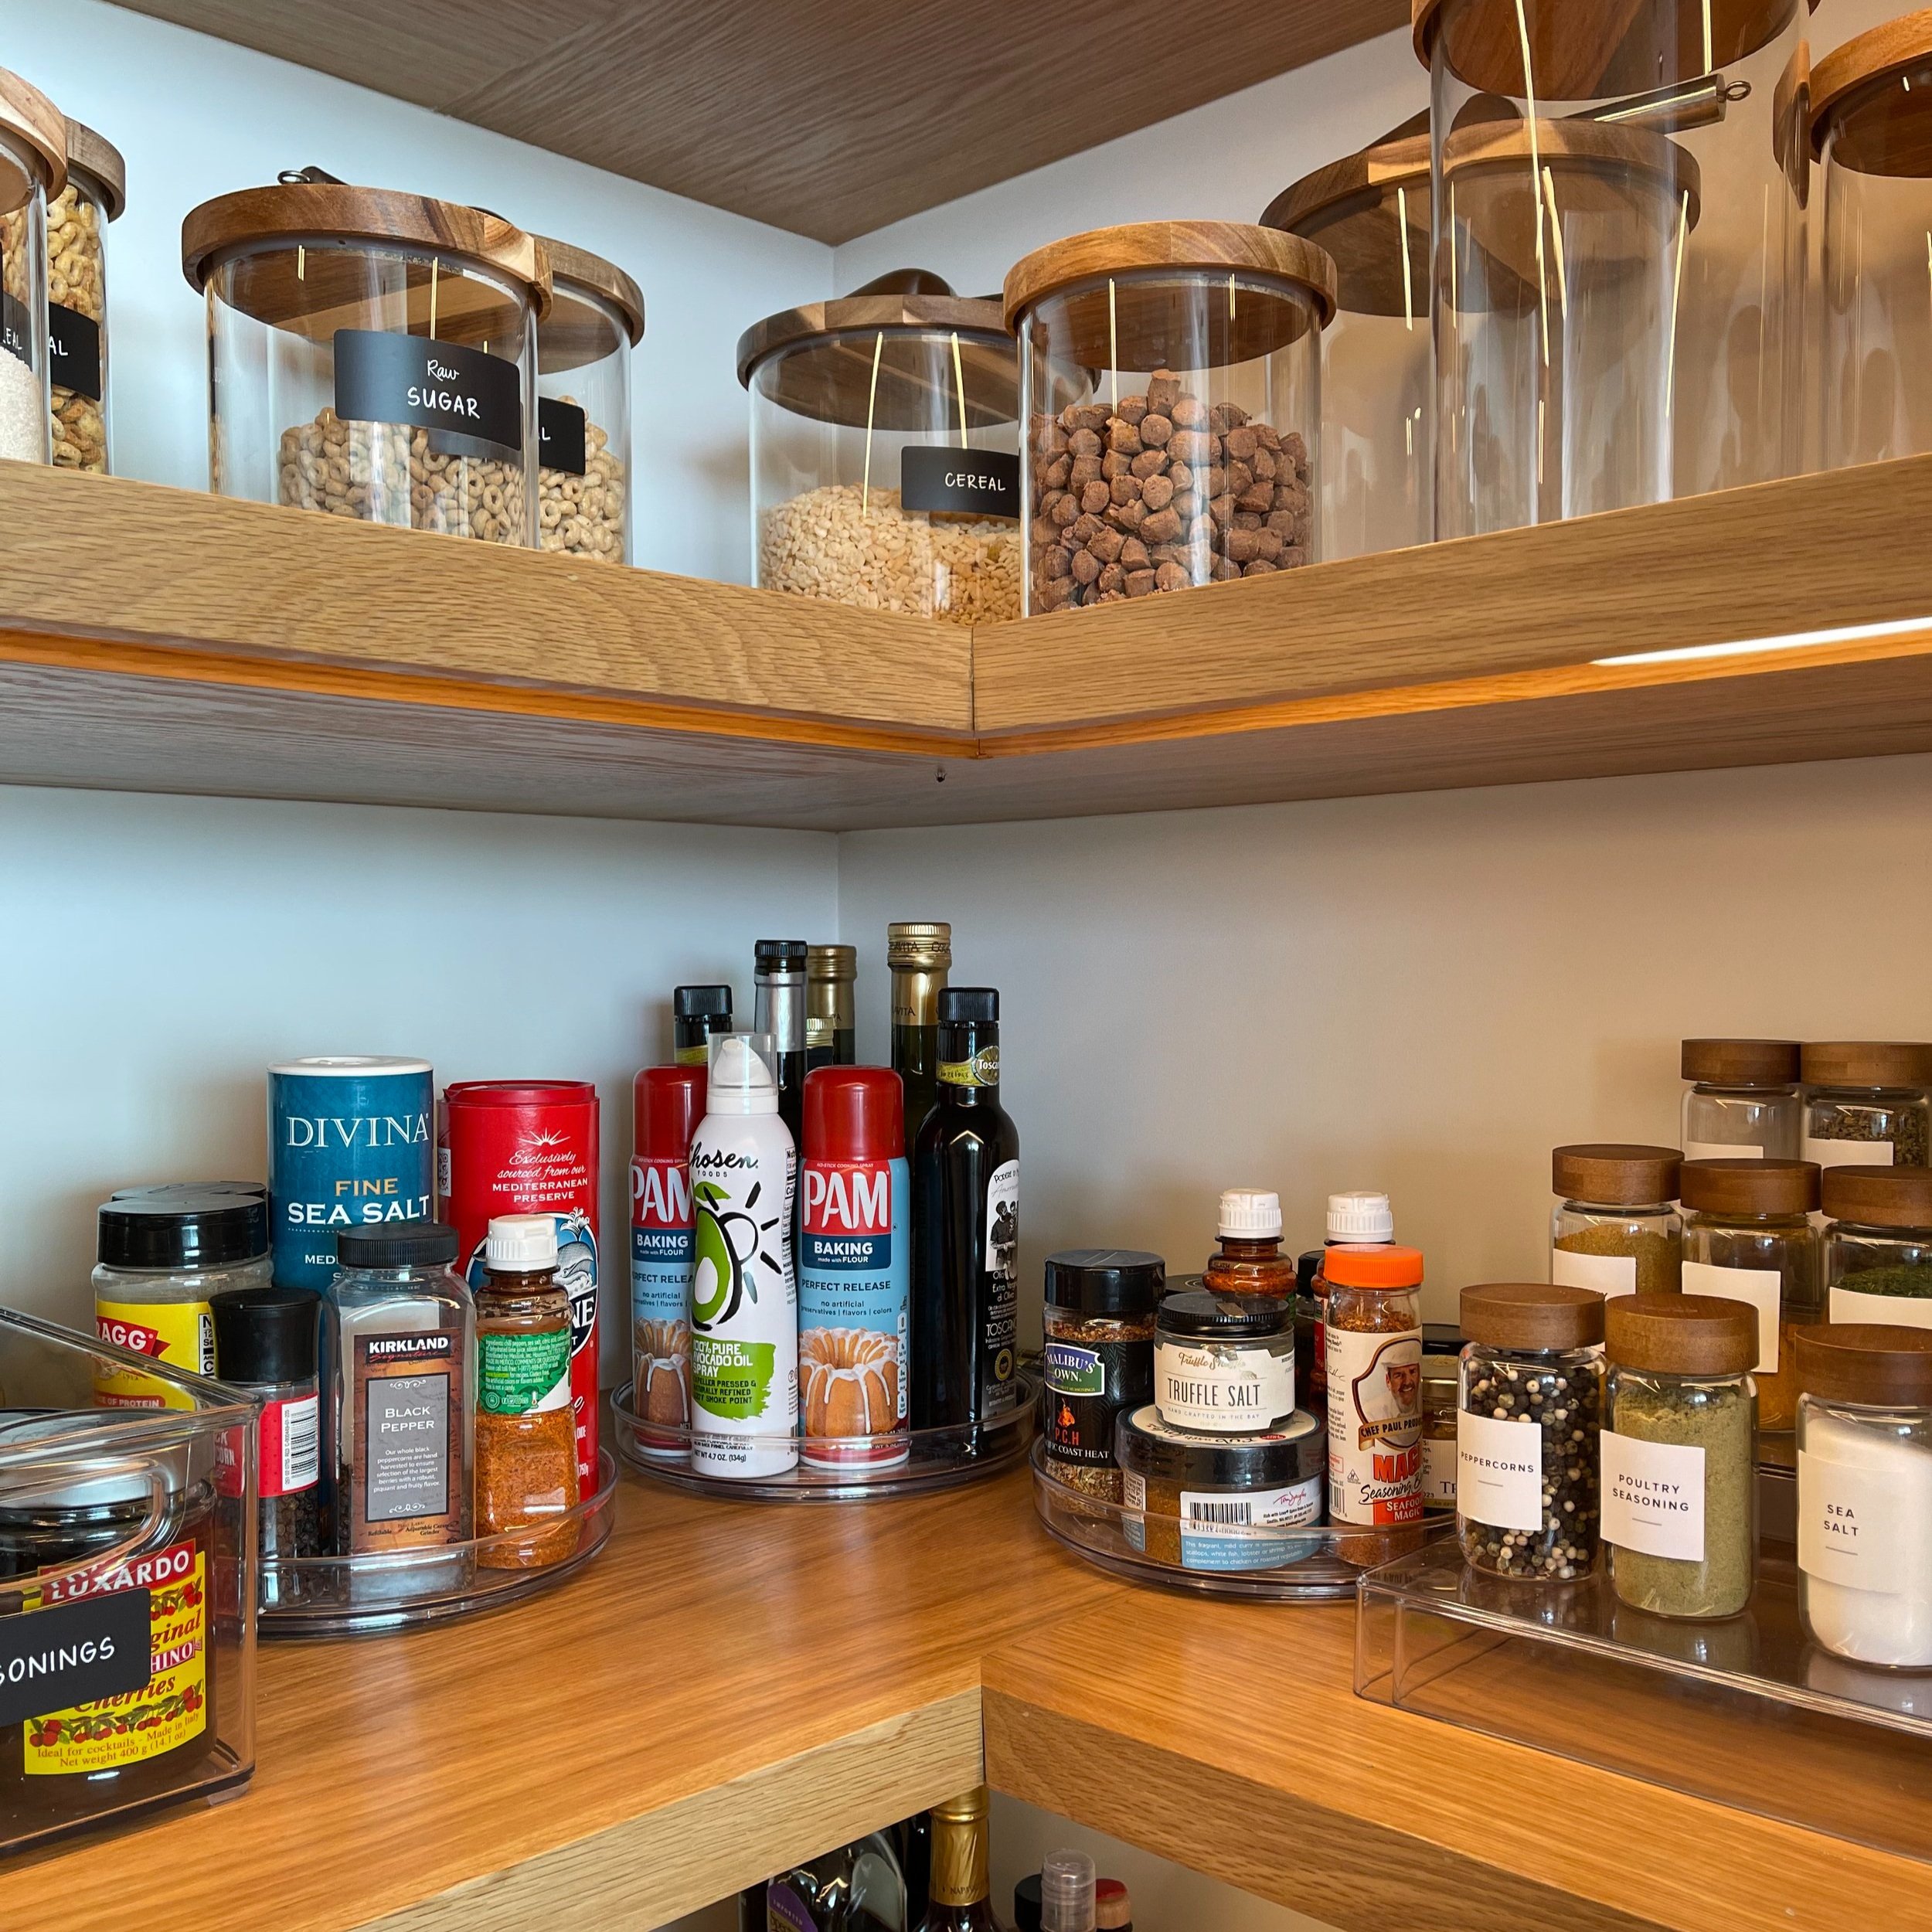 We Found Deals on Food Storage and Organization Products That Will